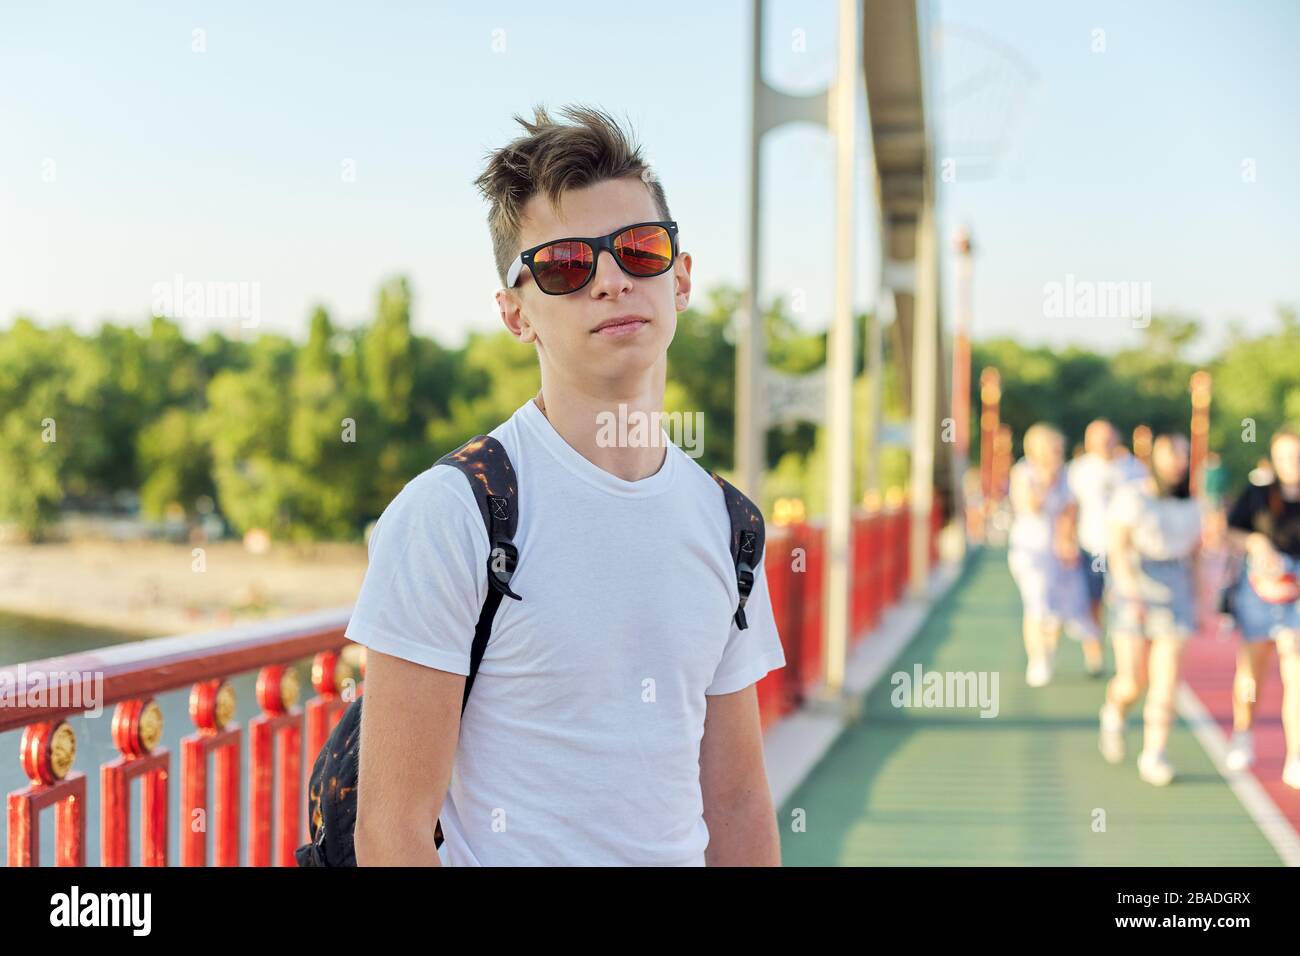 https://c8.alamy.com/comp/2BADGRX/teen-boy-15-years-old-with-fashionable-hairstyle-sunglasses-looking-at-camera-standing-on-footbridge-over-the-river-on-sunny-summer-day-2BADGRX.jpg